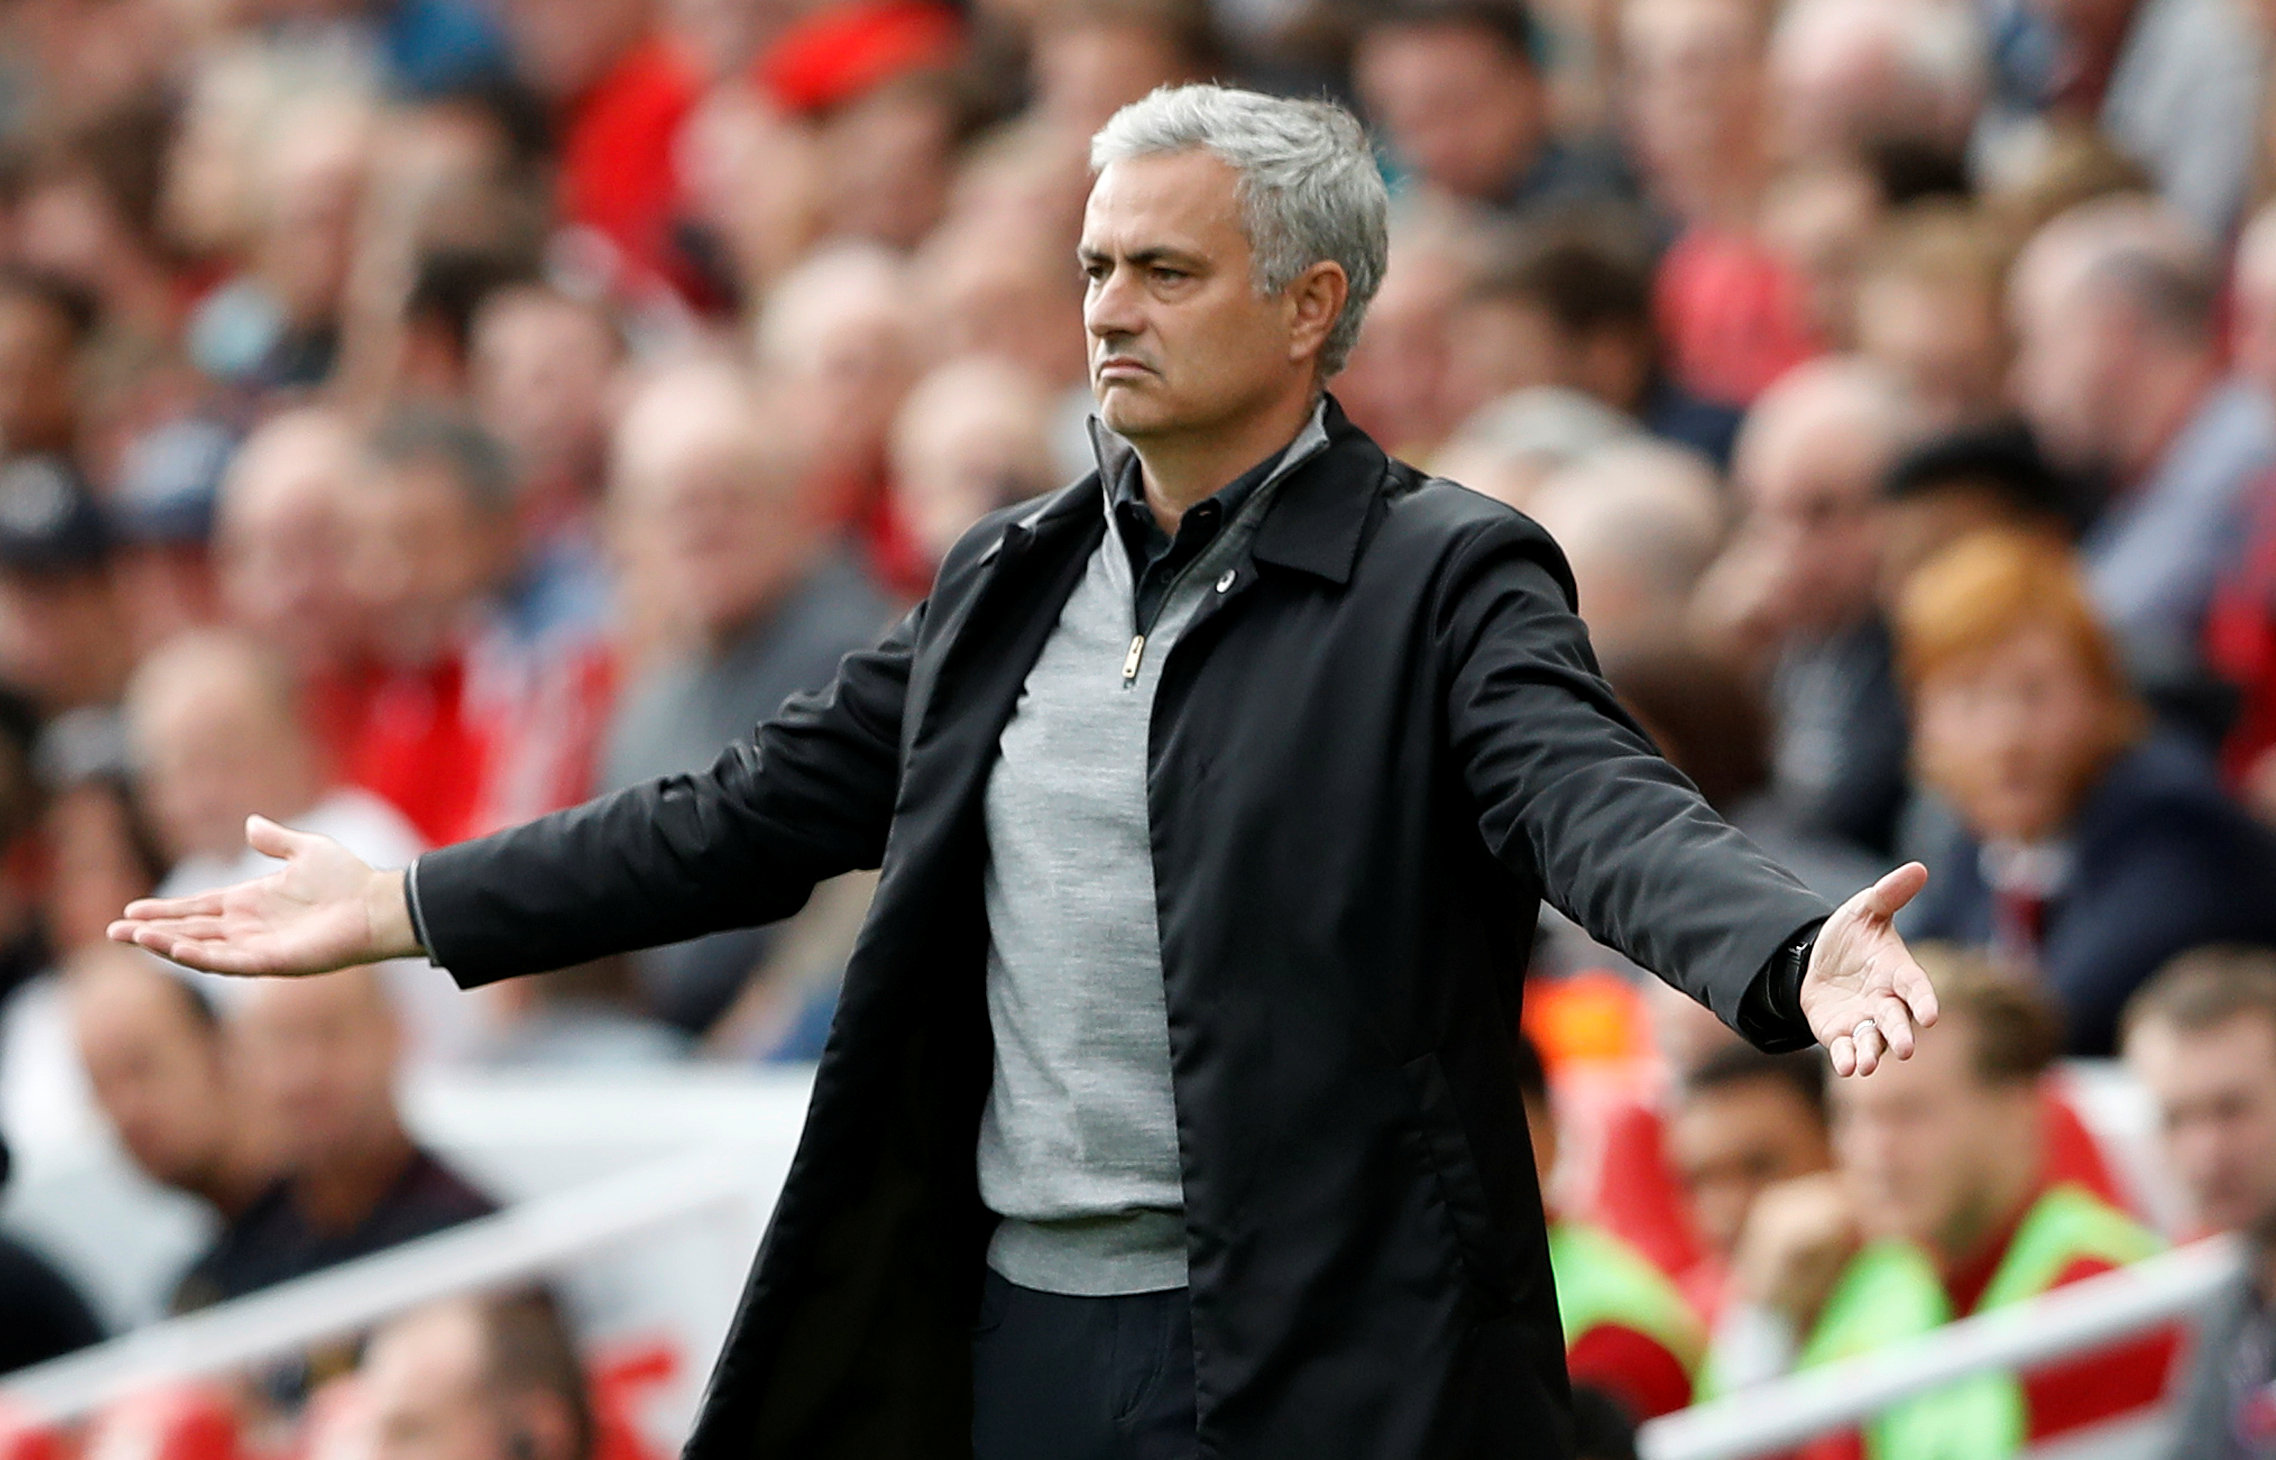 Football: Mourinho suggests Klopp as much to blame for bore draw